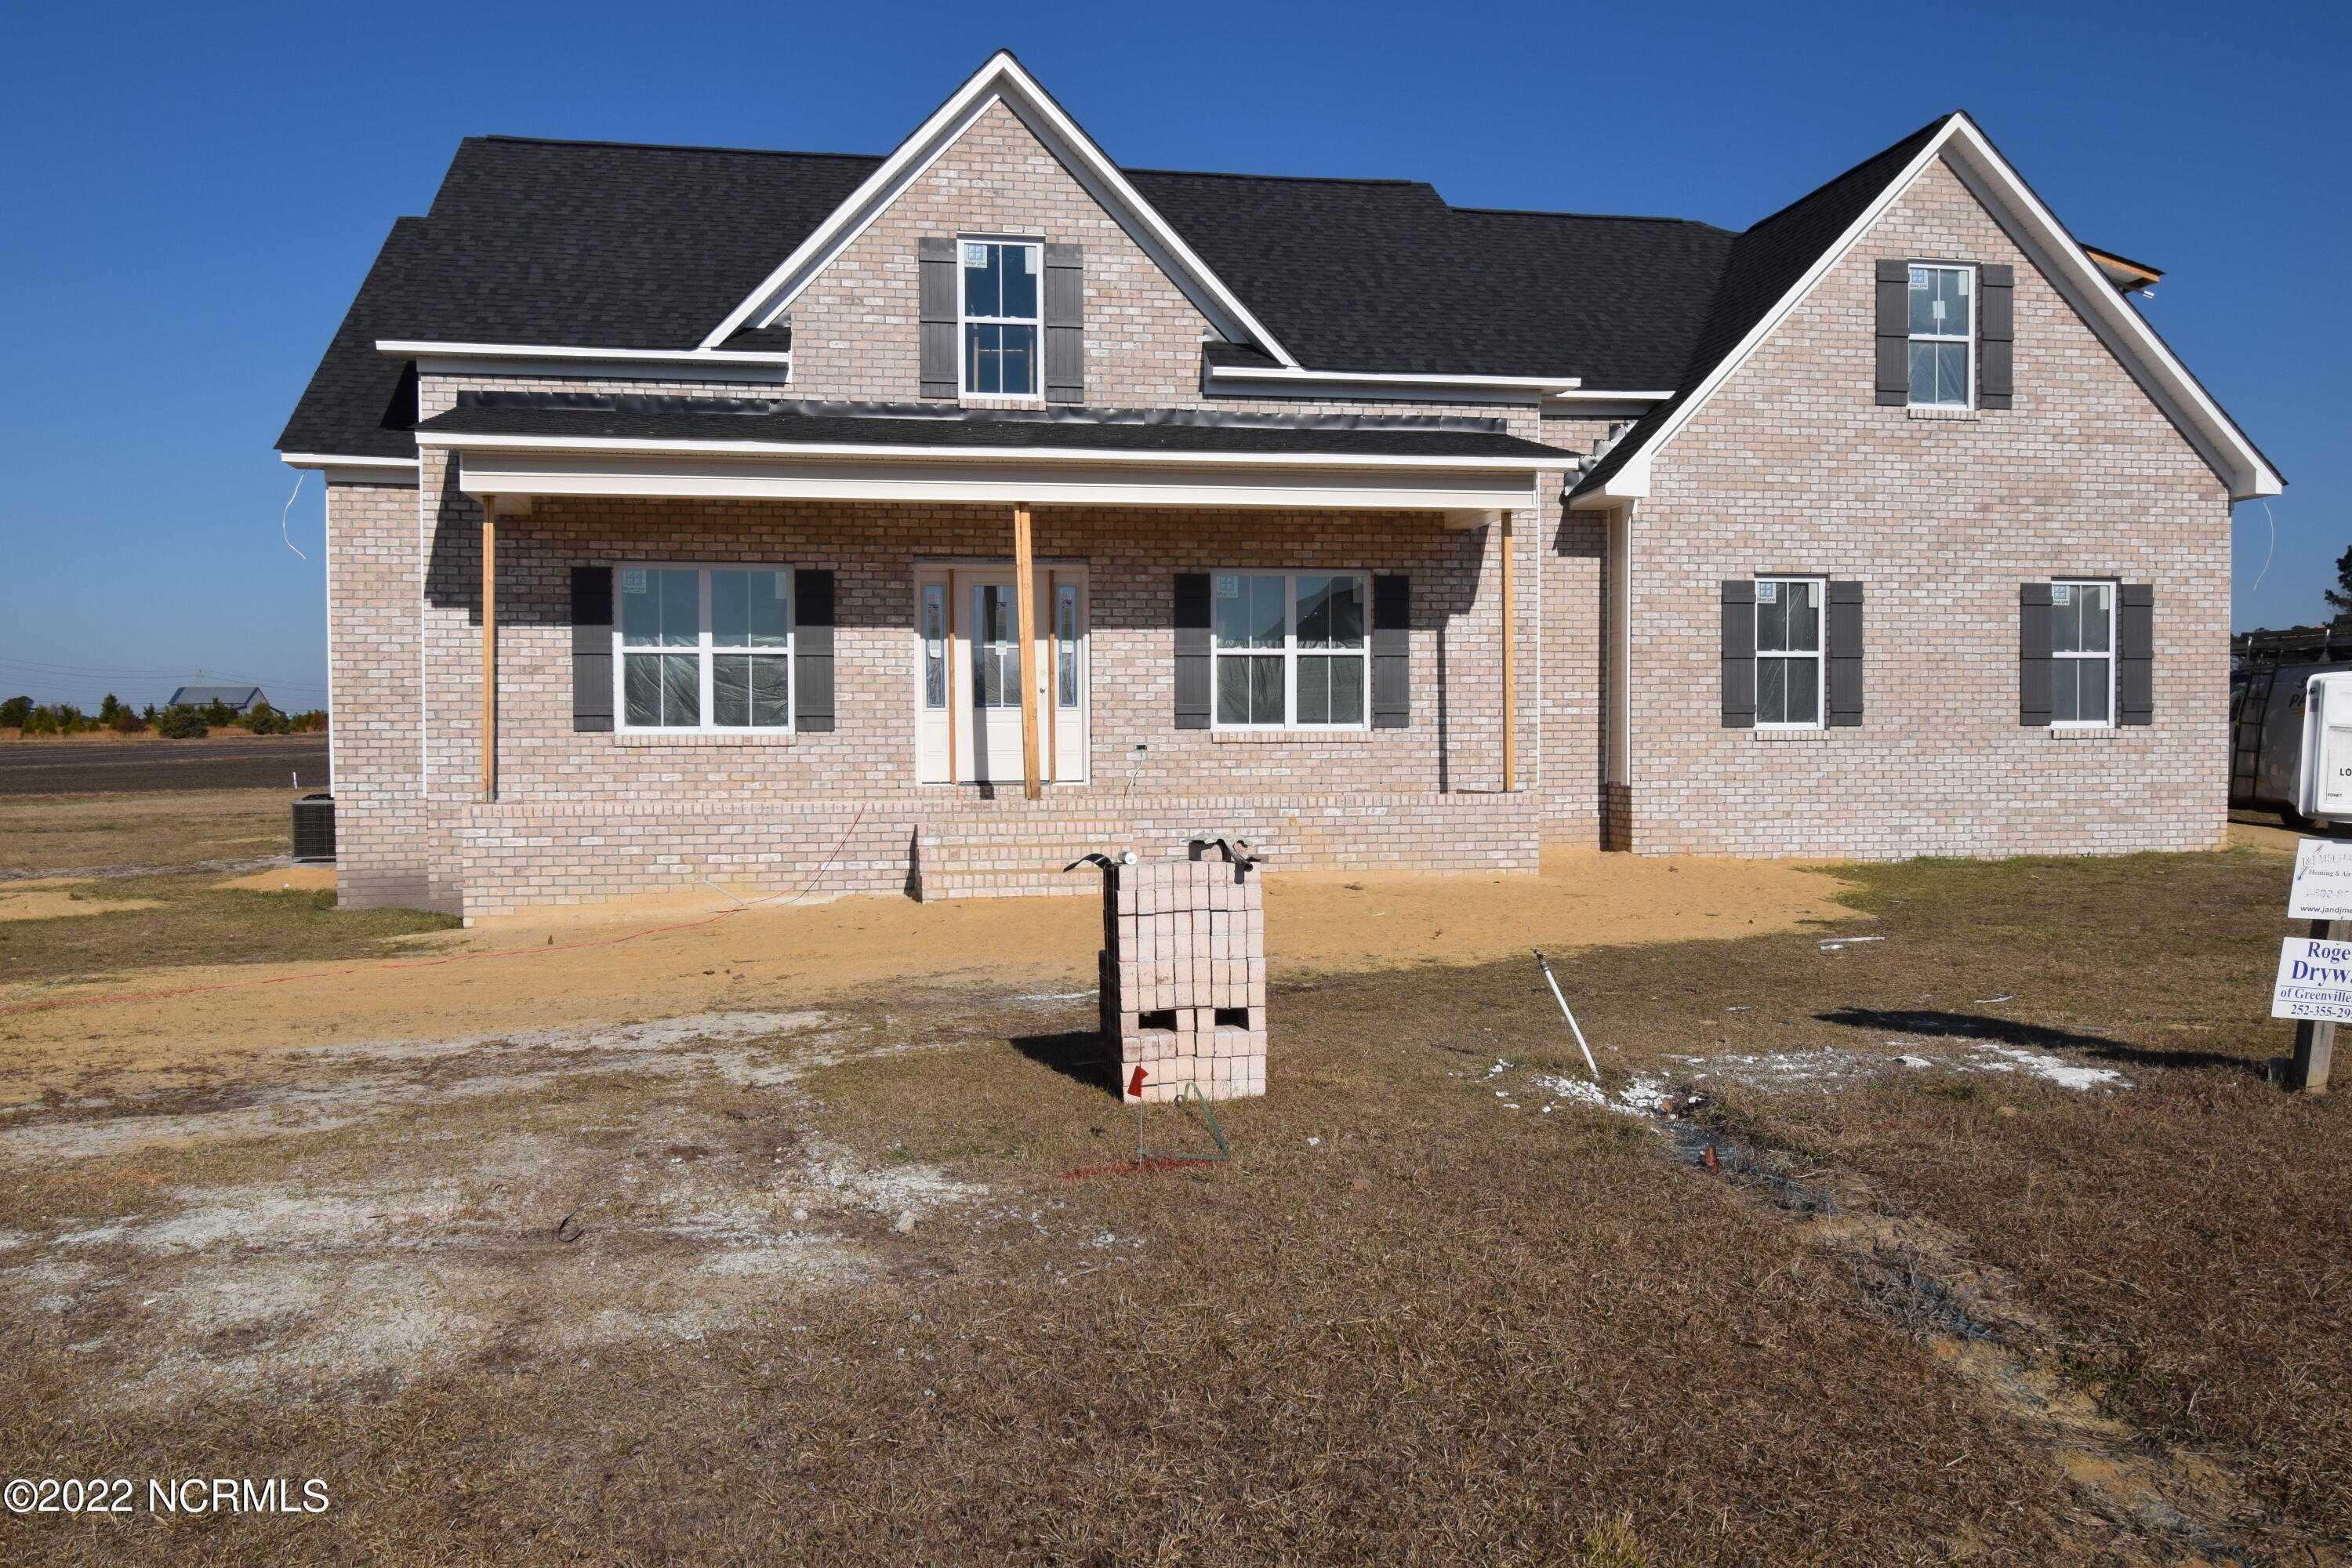 1745 Doolittle Court, 100307930, Winterville, Single-Family Home,  for sale, David Lever, Realty World Lever & Russell